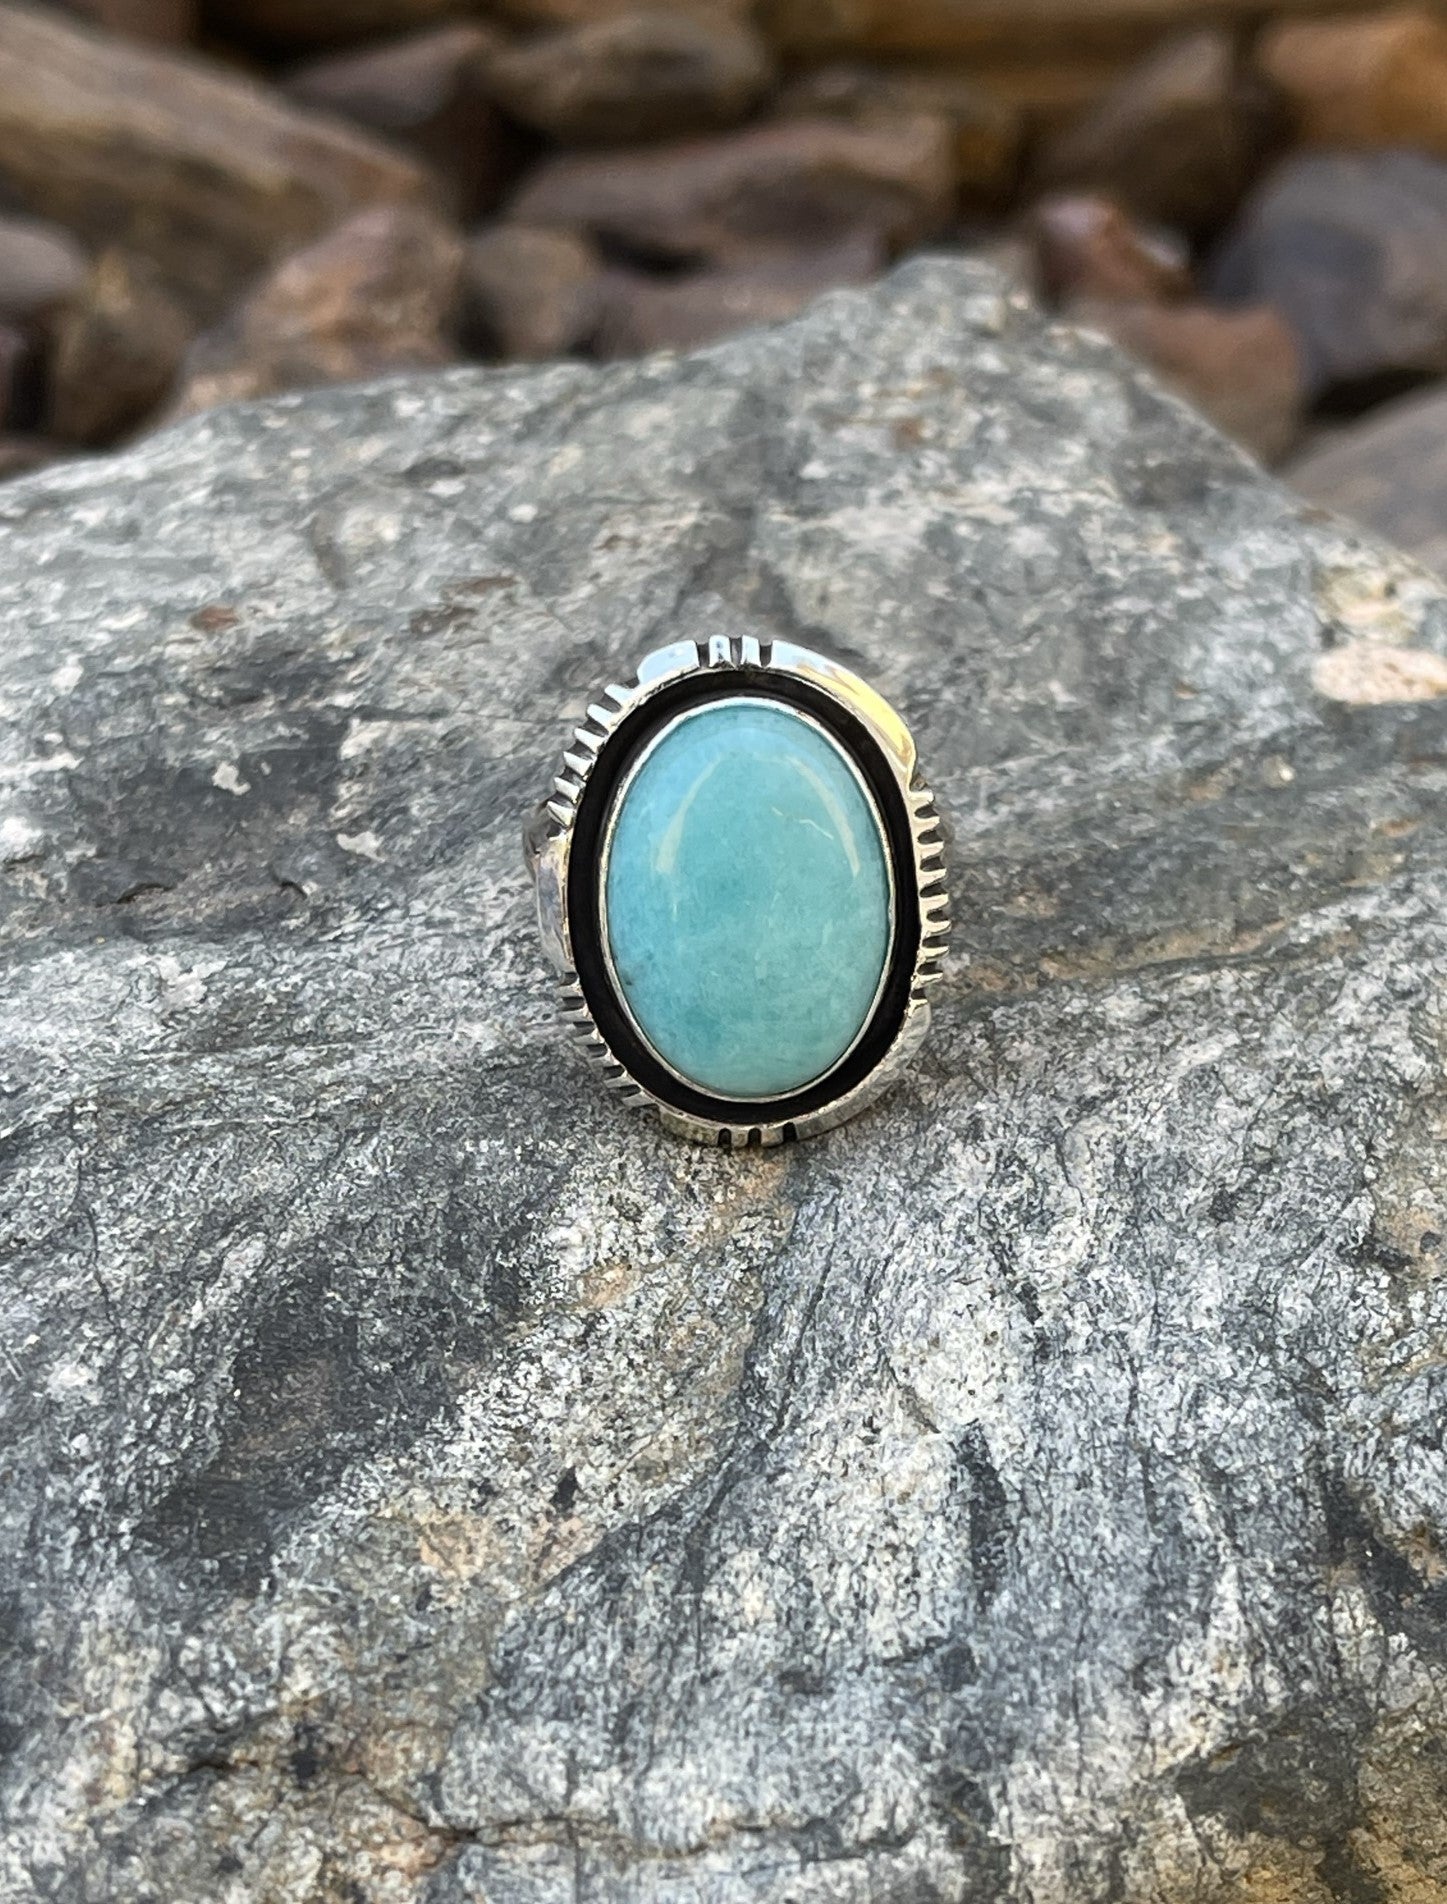 Handmade Sterling Silver Apatite Ring with Shadow Box Trim - Size 8